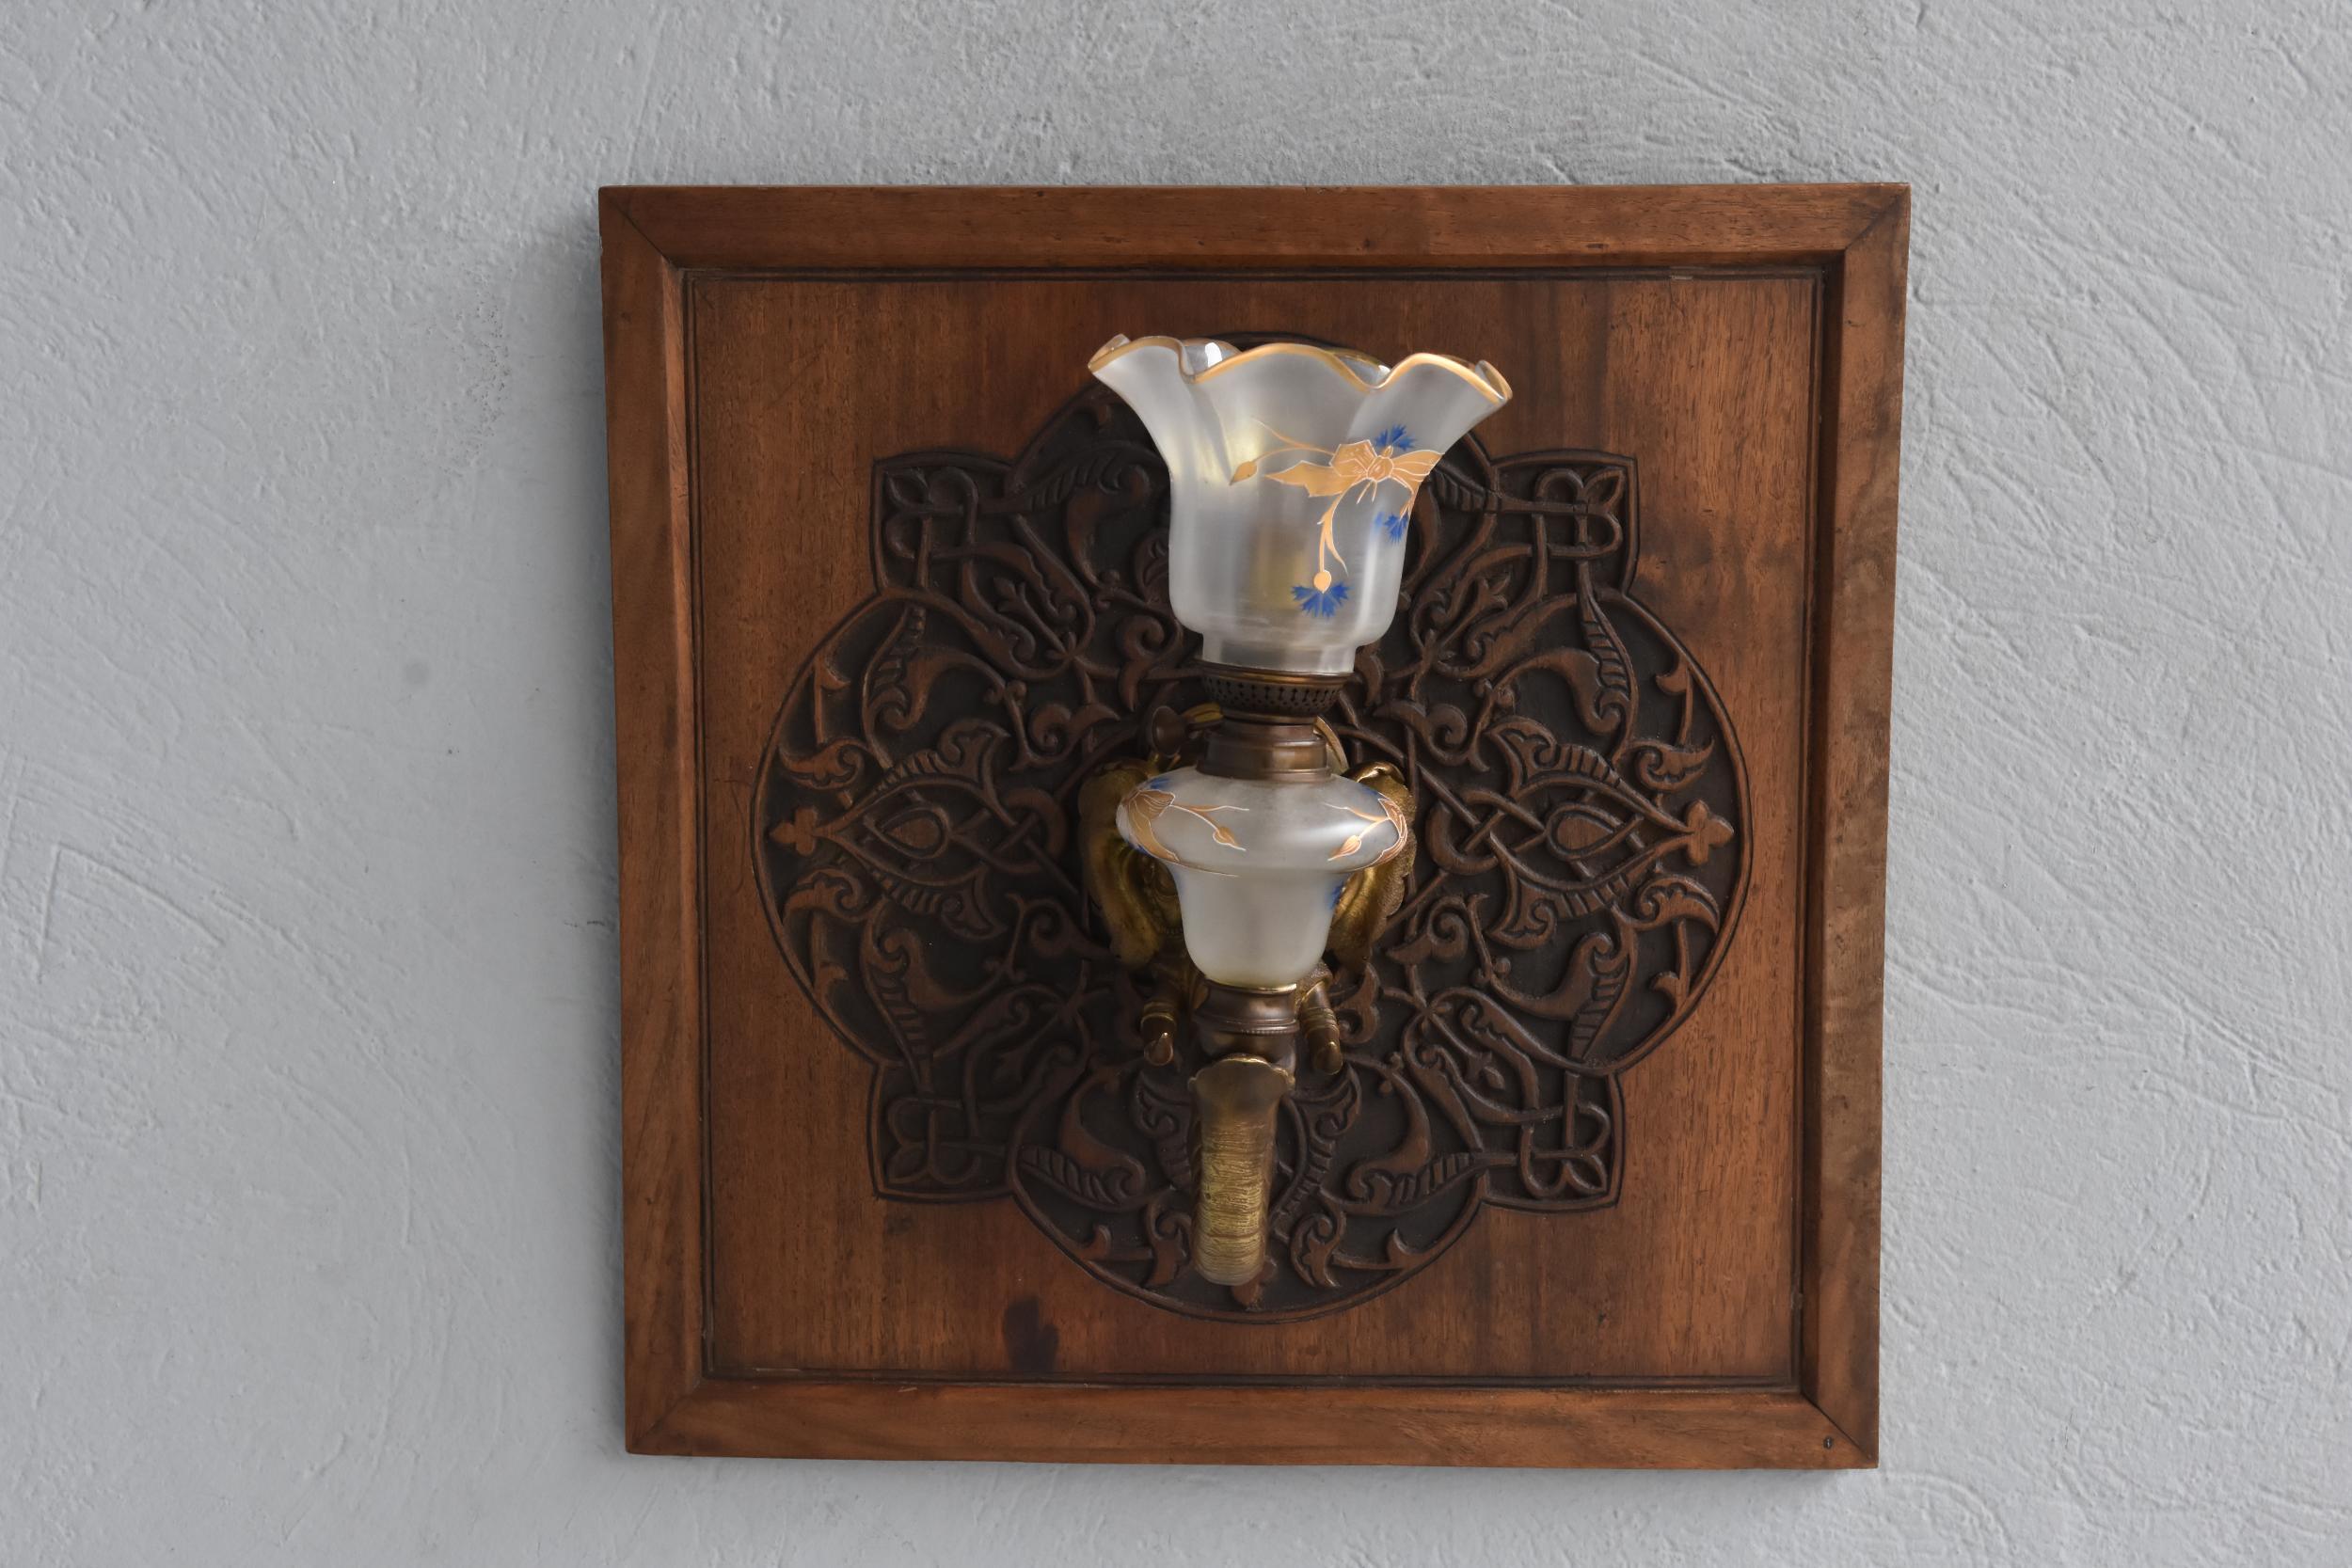 Elephant wall lamp from 1900 in bronze mounted on a carved wooden mandala. Glass tulip painted in gold.